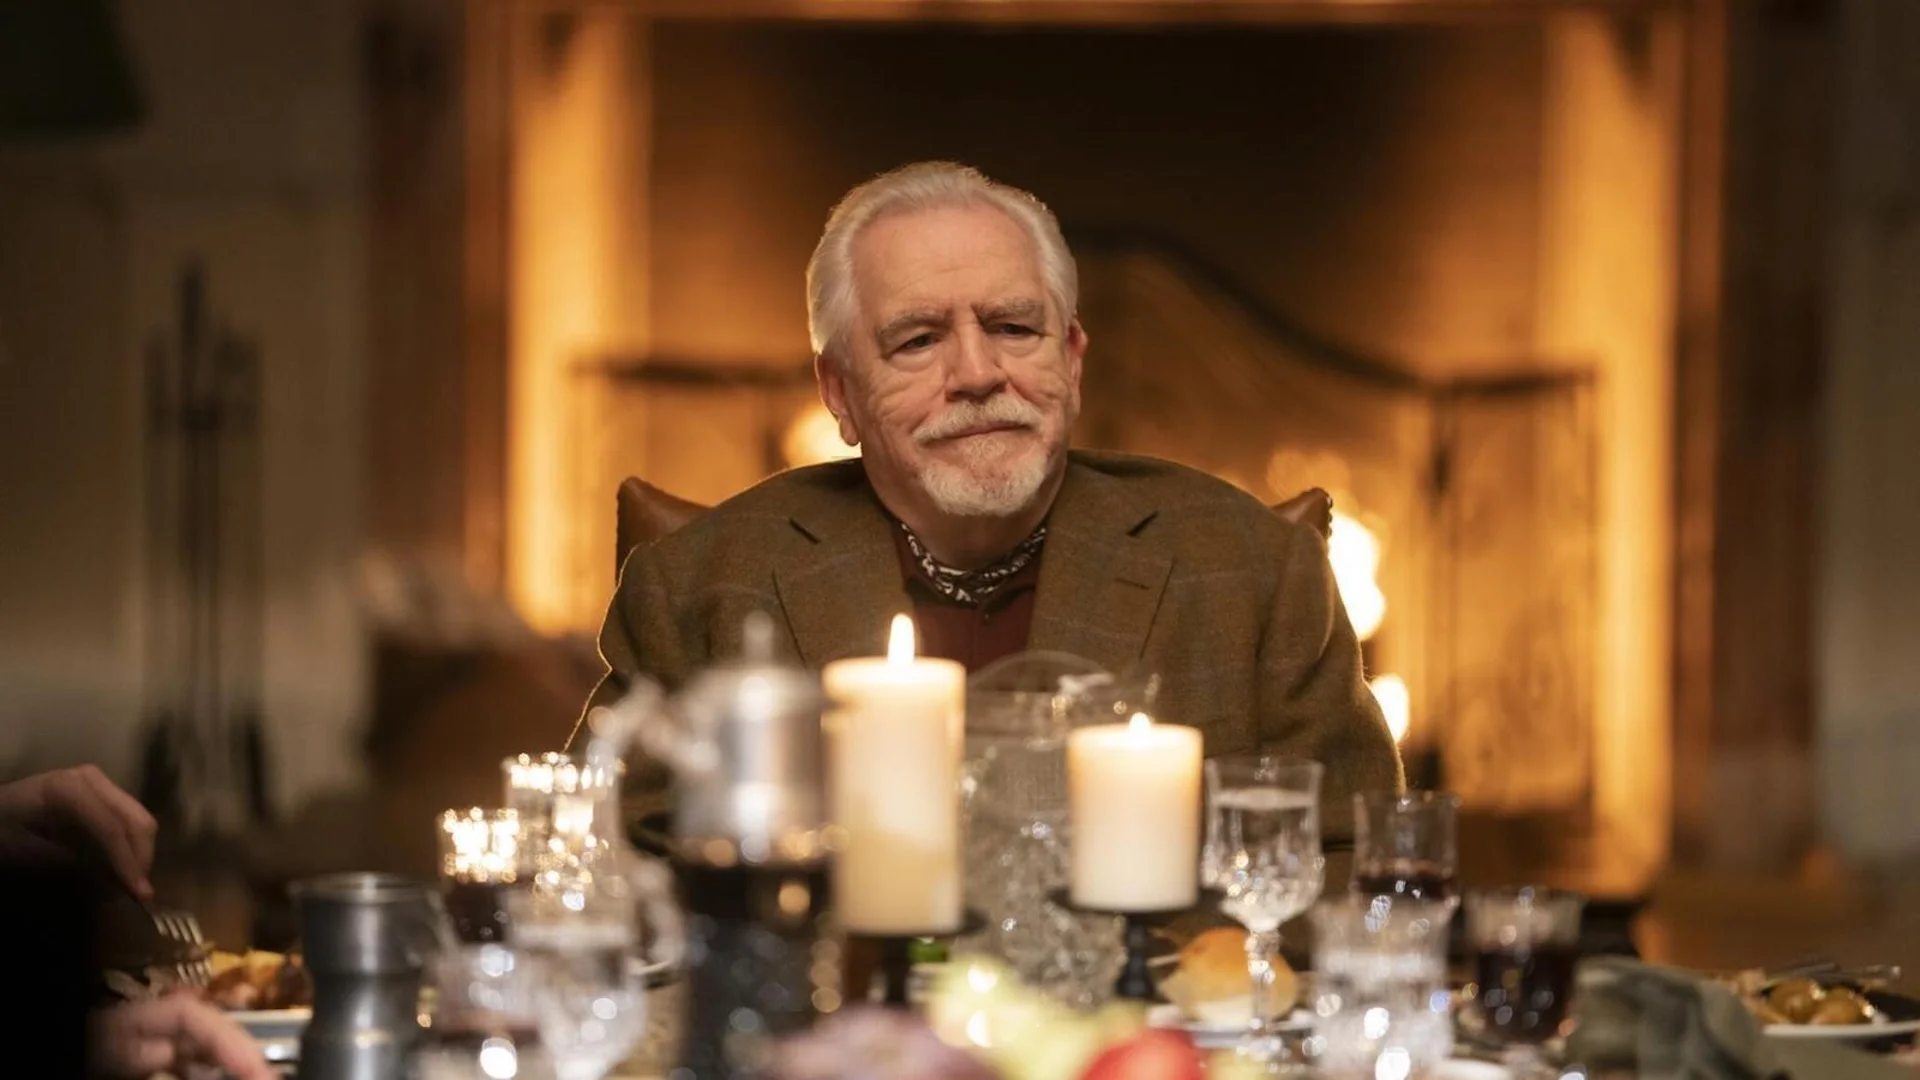 Succession Season 3 Released Date is Out! Know all the Details Here